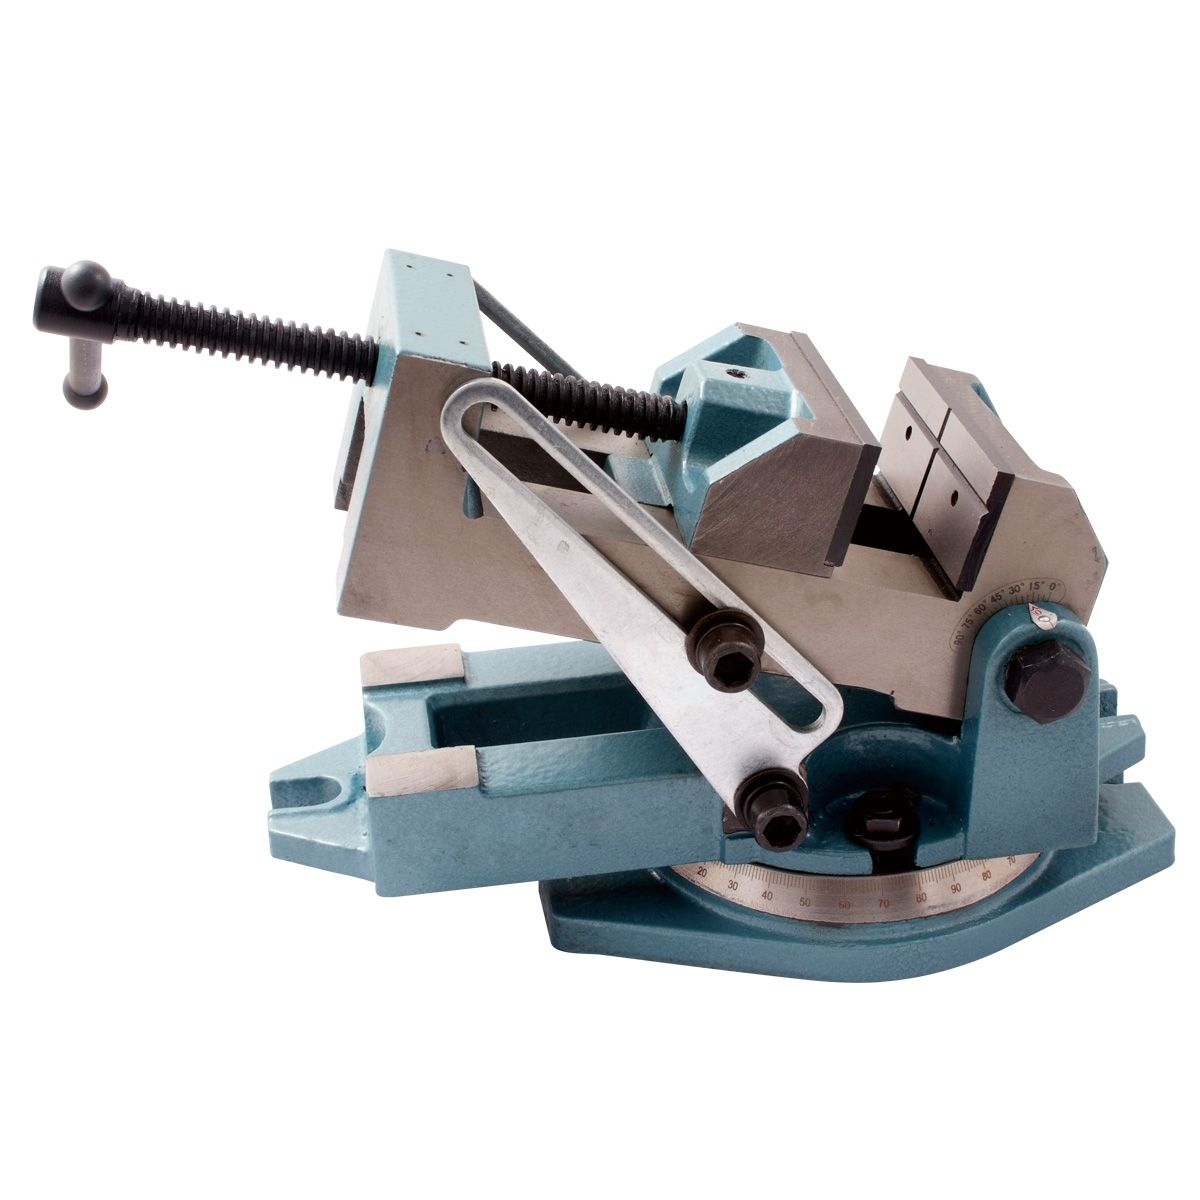 6" ANGLE DRILL PRESS VISE WITH SWIVEL BASE (3901-1737)